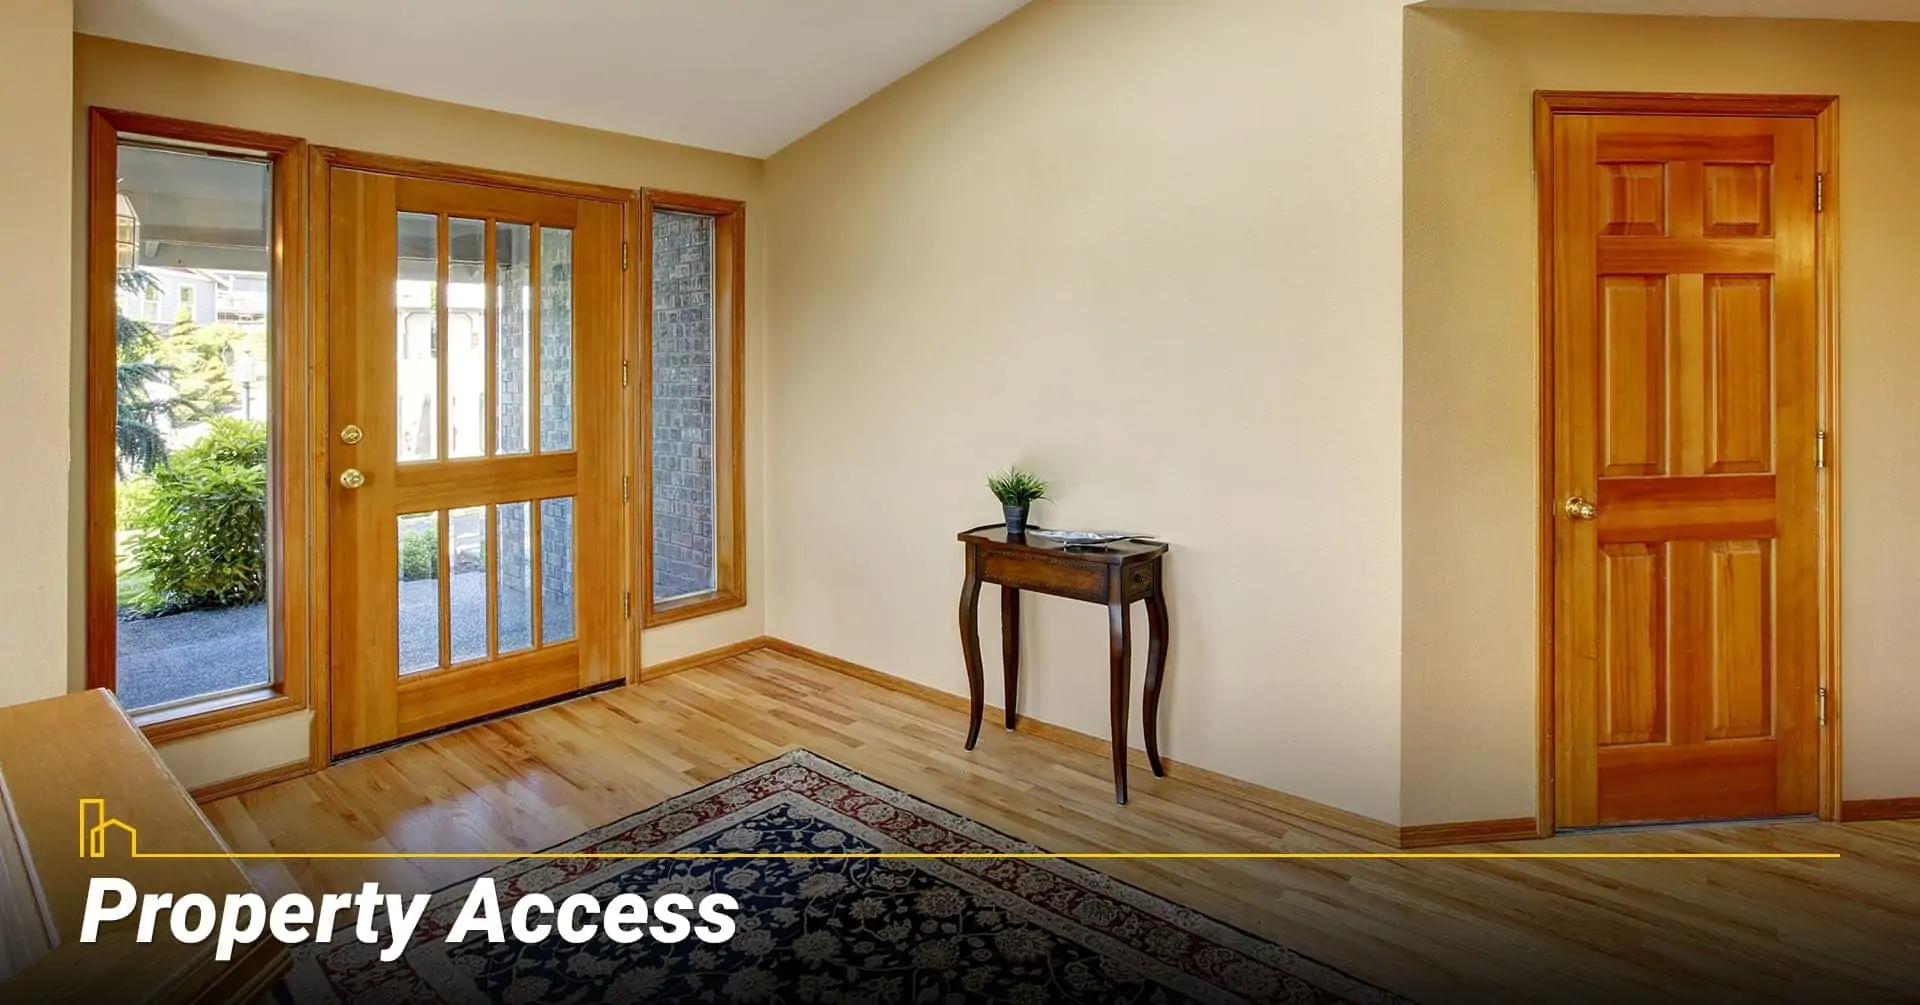 Property Access, provide access to your property